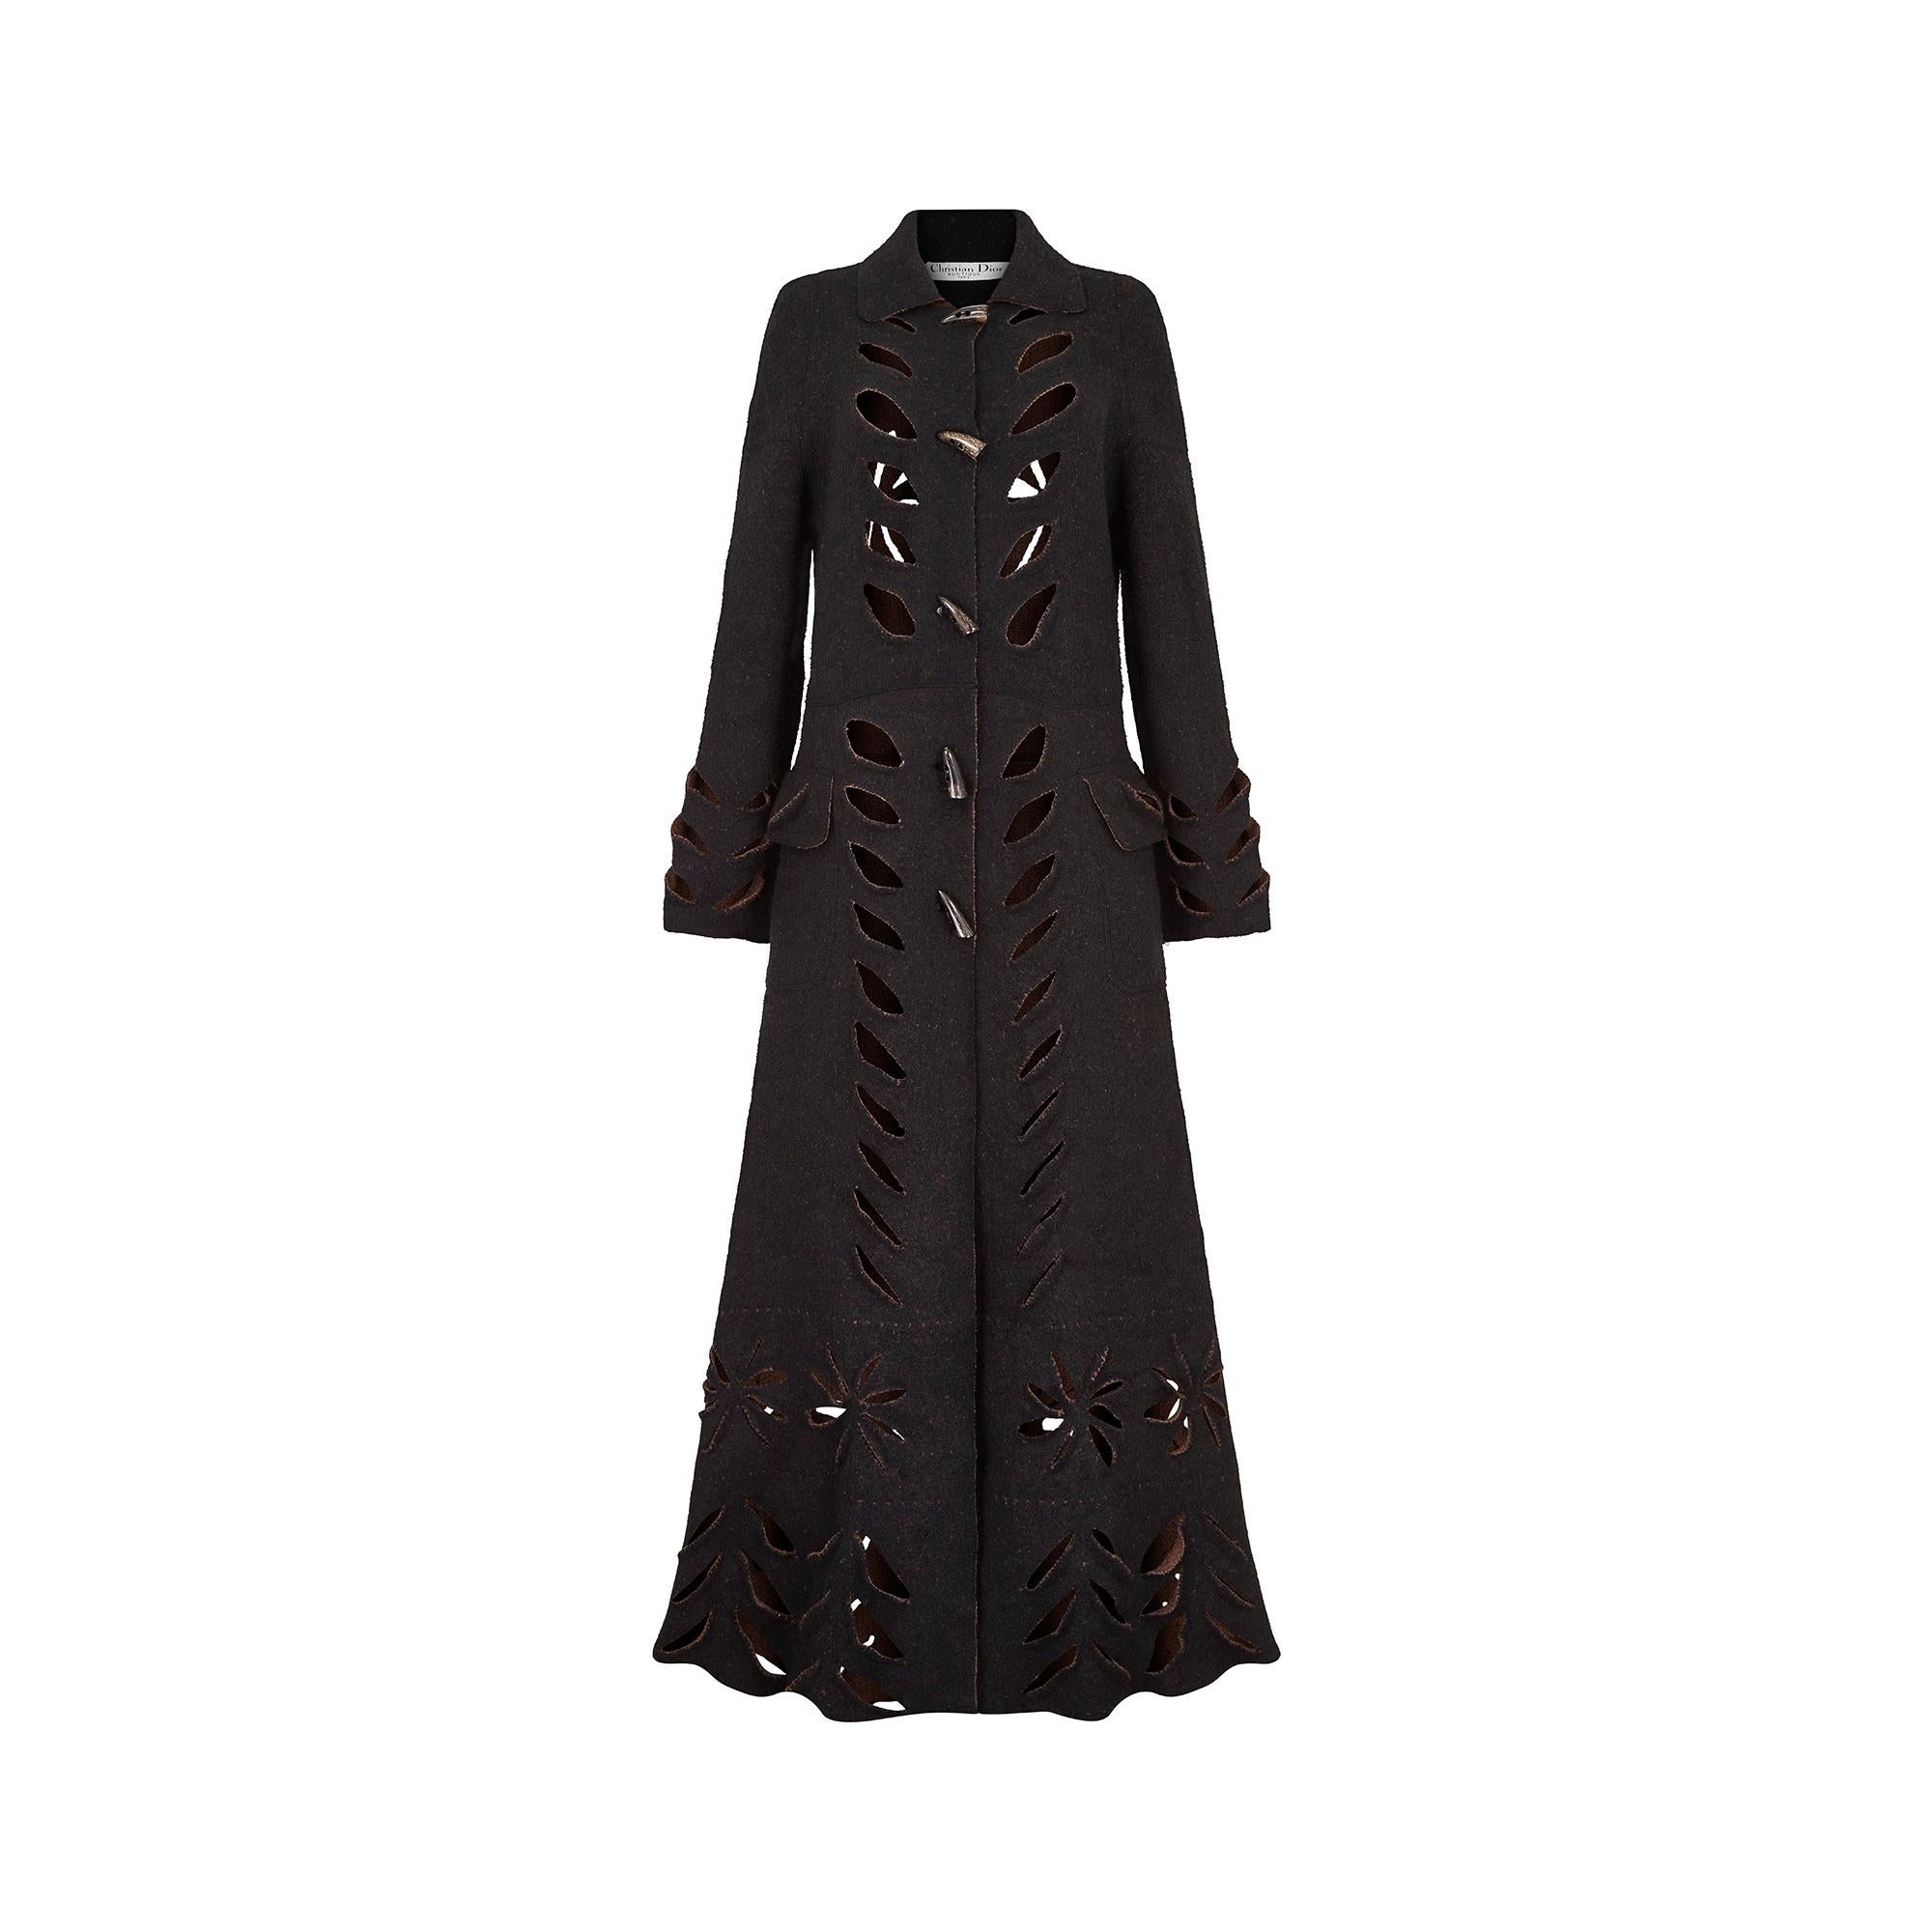 This John Galliano for Christian Dior wool felt coat is in a classic late 1990s or Y2K 'coatigan' shape, with wide sleeves and button detail.  It features an unusual cutout design of flowers and slits which create an almost leaf-like shape. The